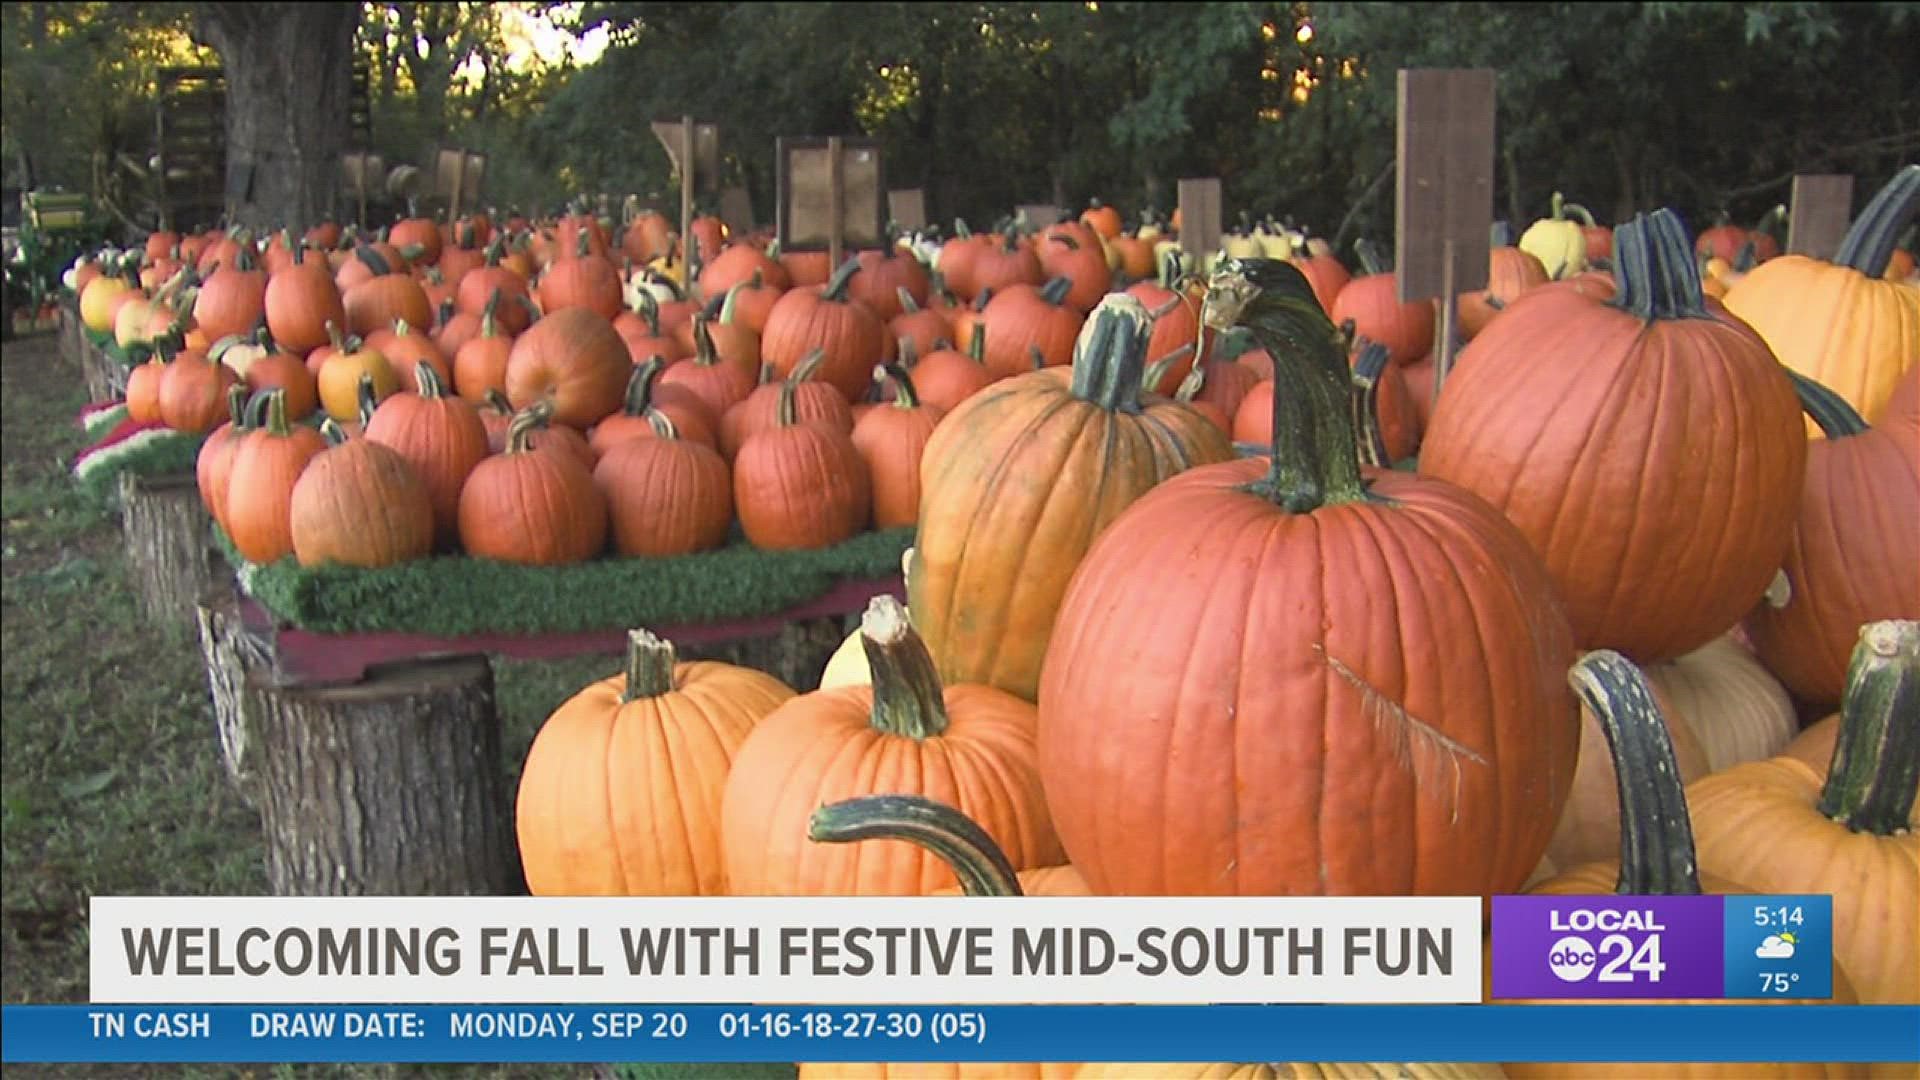 October has become the busiest month of the year for the Millington business.